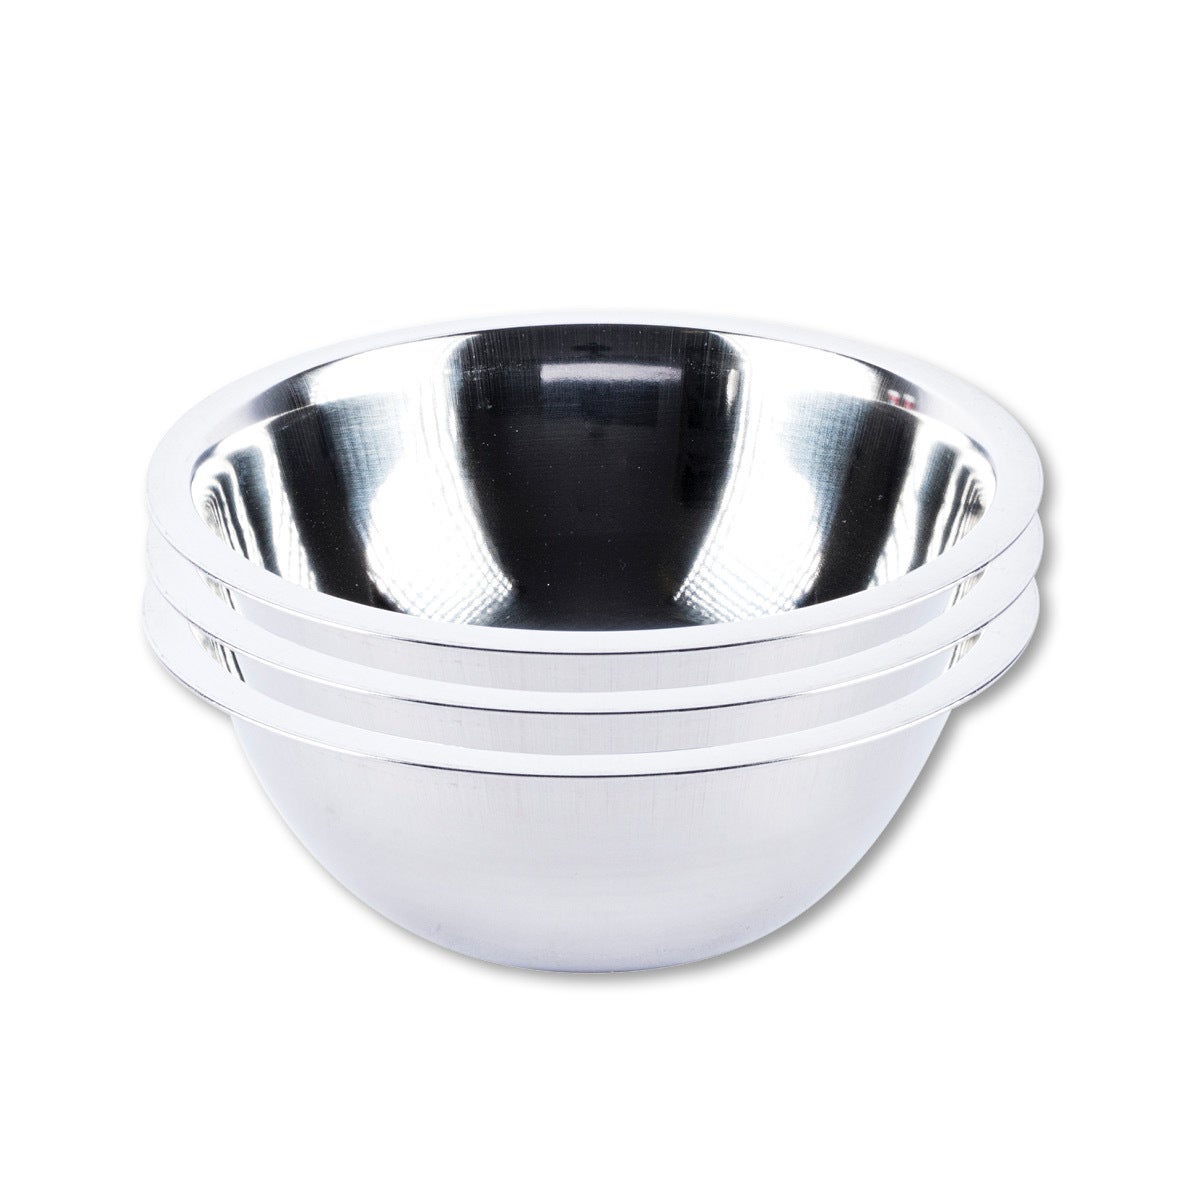 Home Master 3PCE Mixing Bowl Stainless Steel Dishwasher Safe Lightweight 20cm